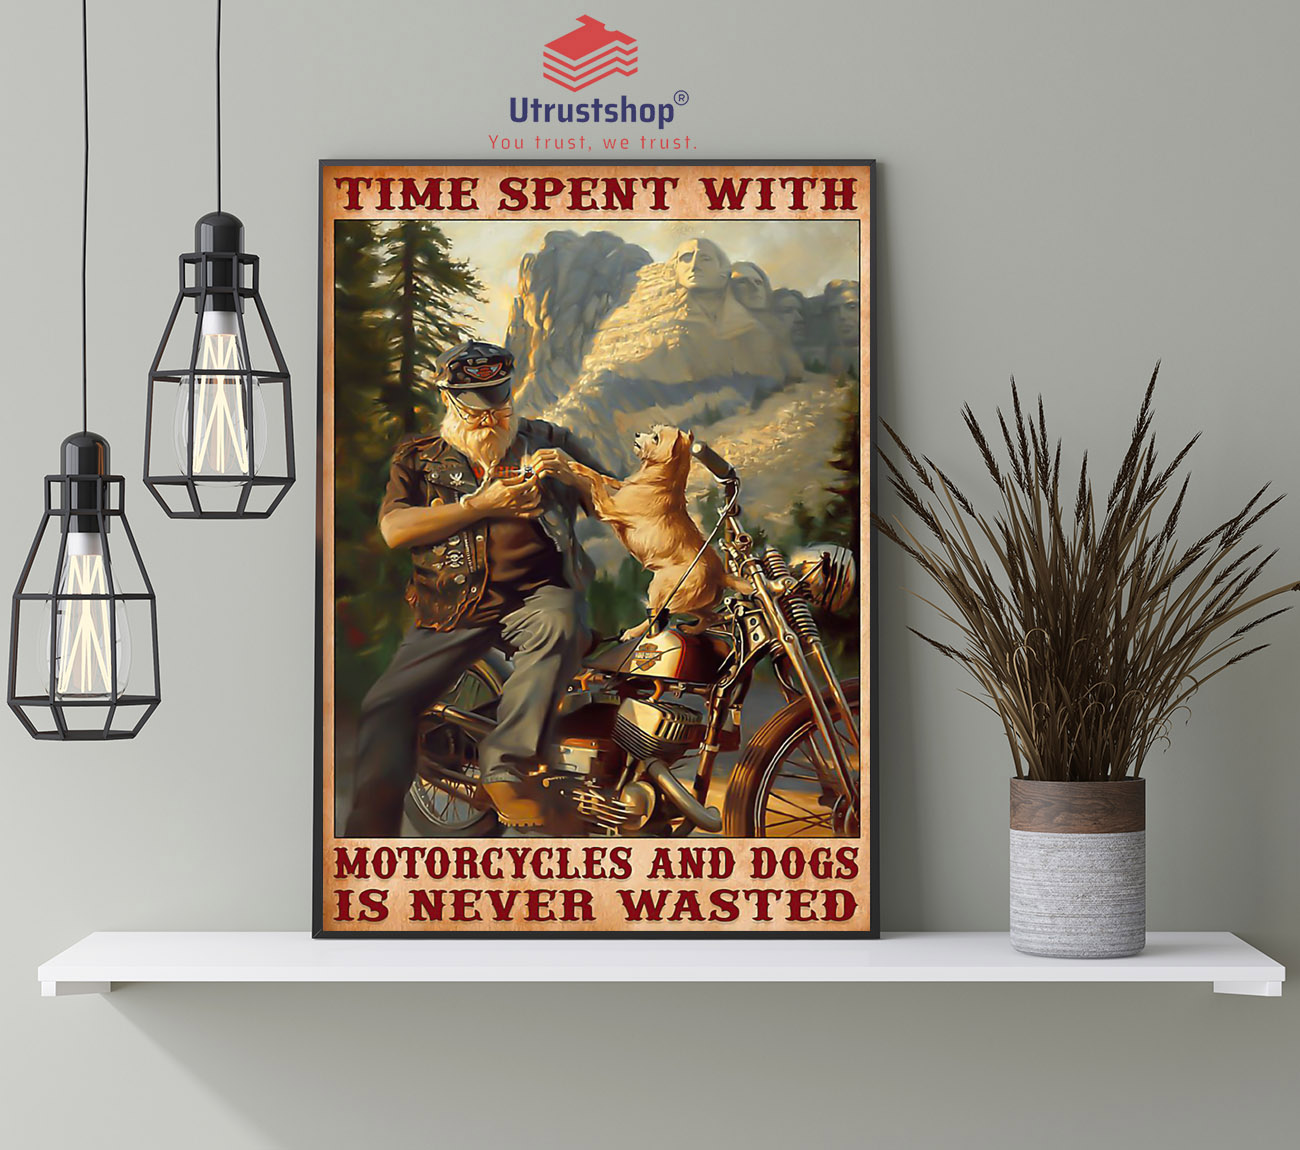 Time spent with motorcycles and dogs is never wasted poster